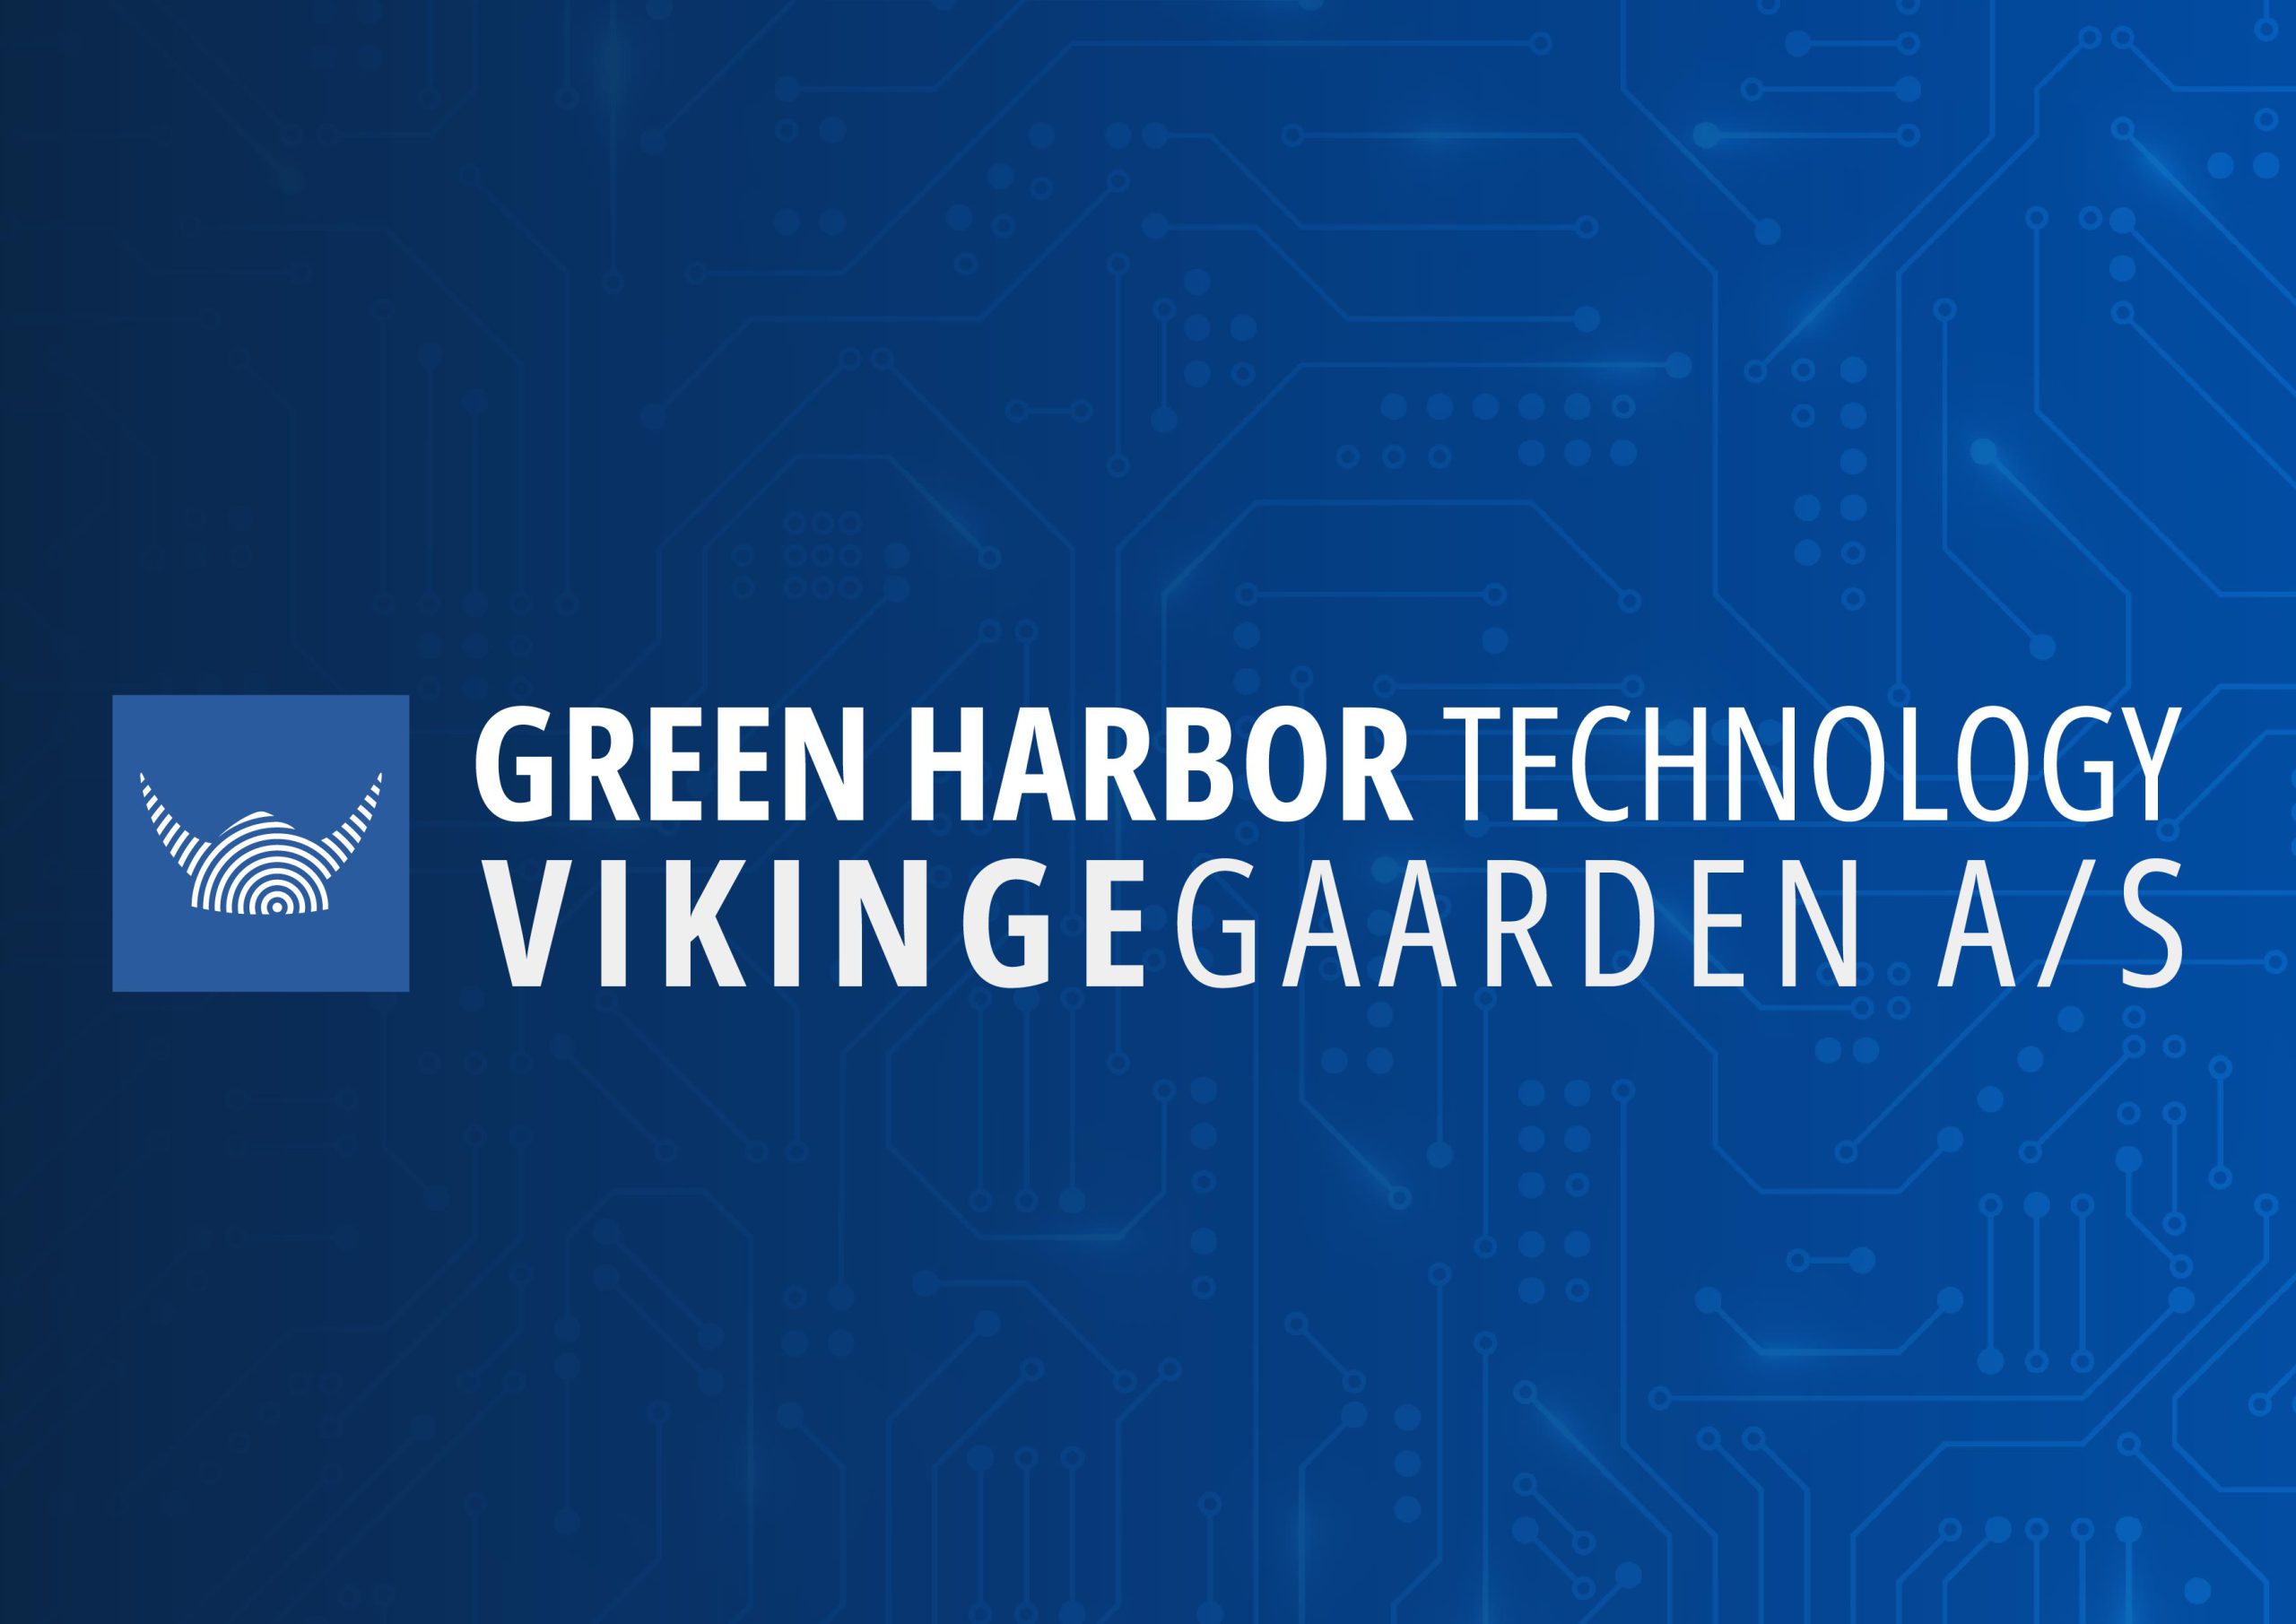 Vikingegaarden expands with a new department